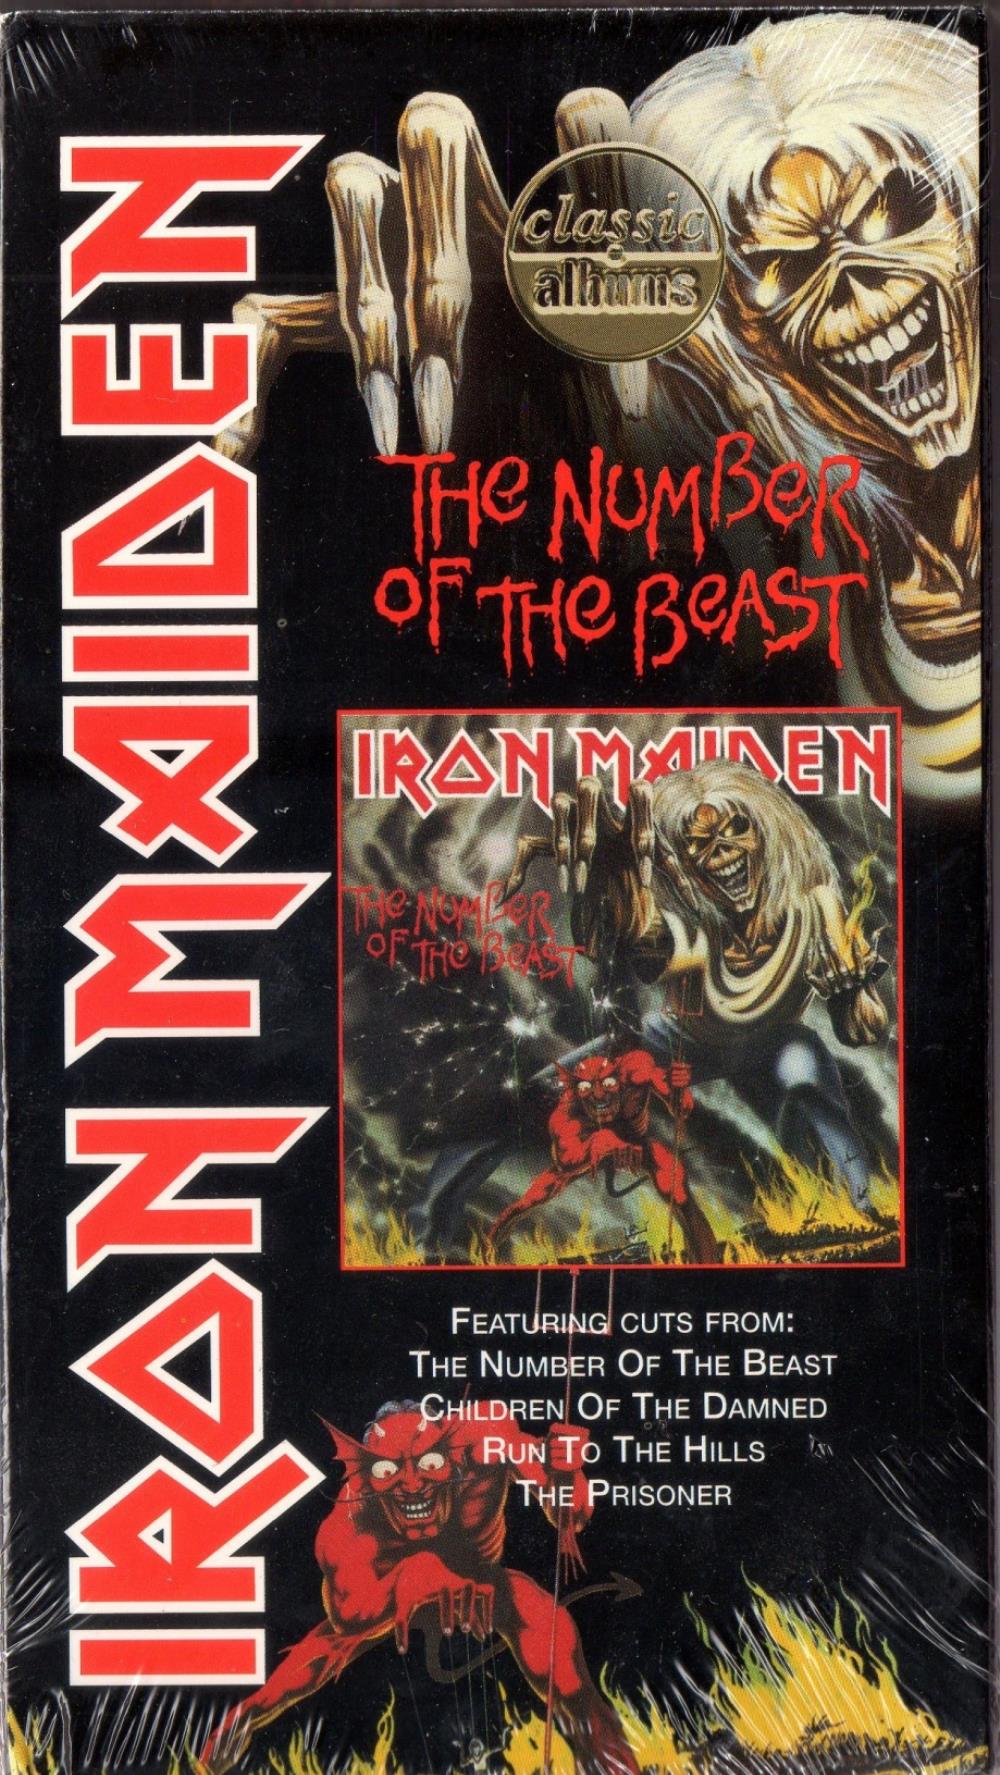 Iron Maiden Classic Albums: The Number of the Beast album cover